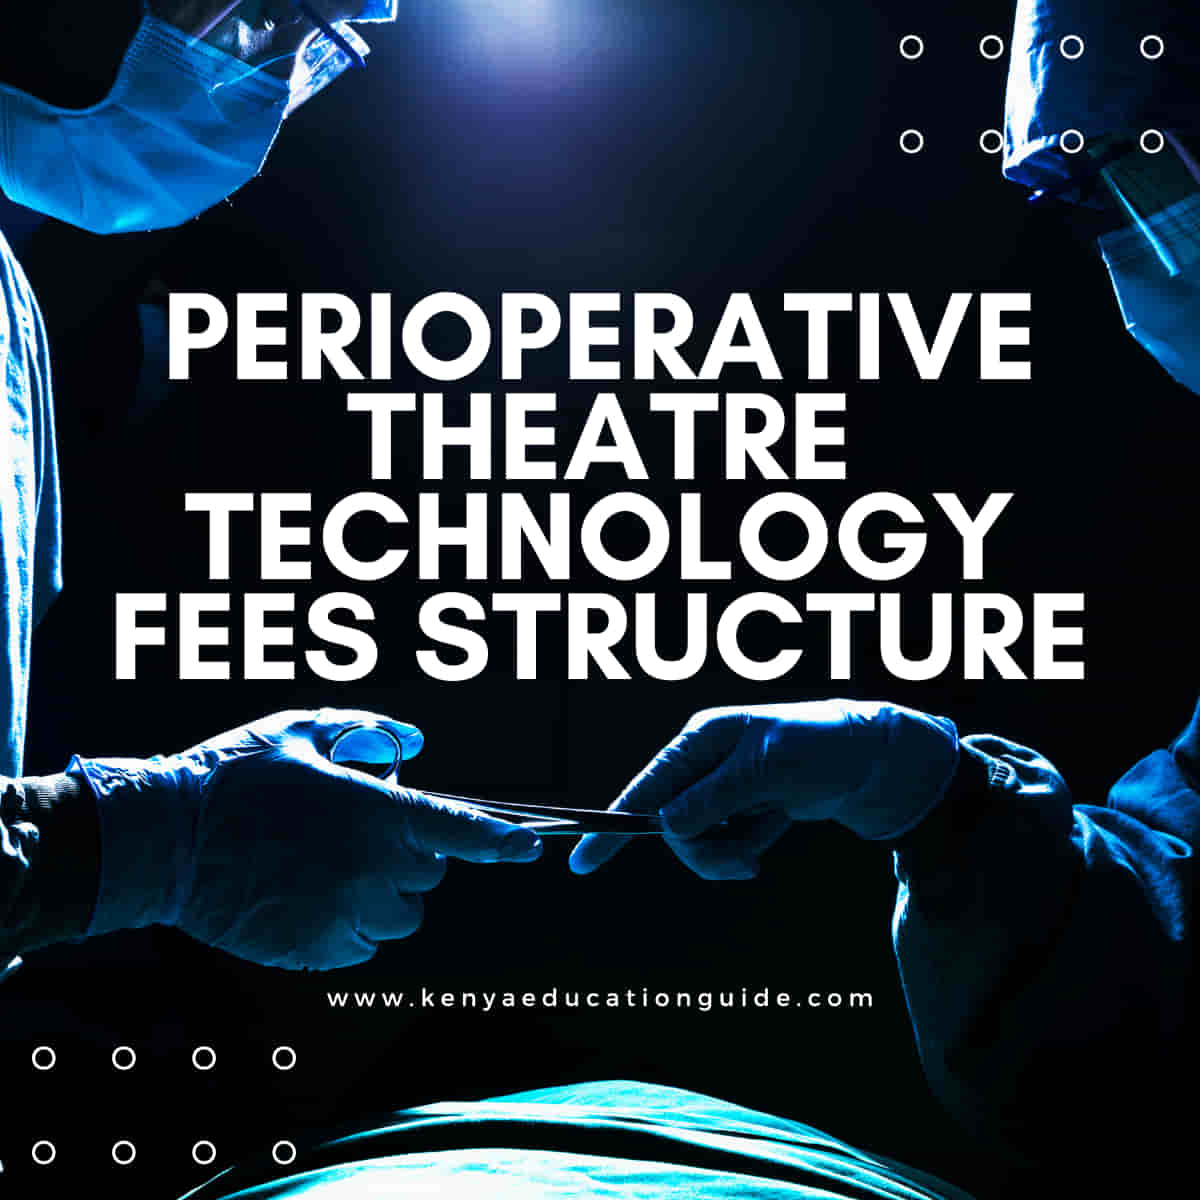 Perioperative theatre technology fees structure